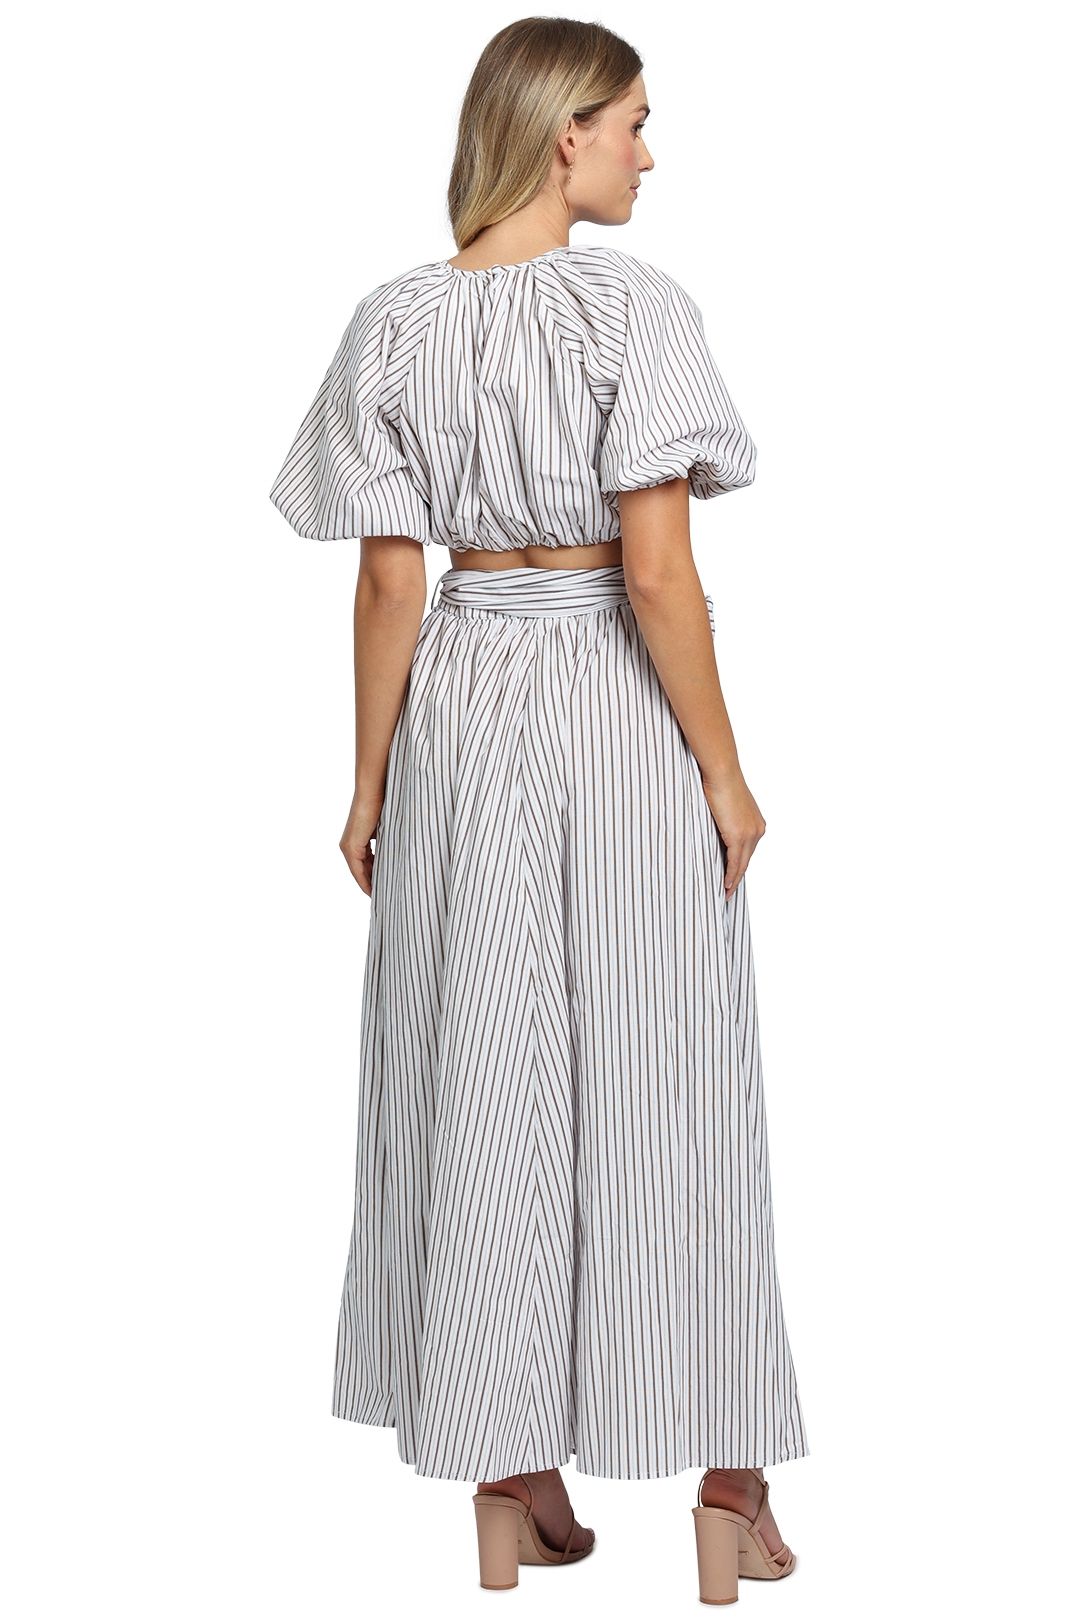 Mink Pink Cassia Top and Skirt Set stripe